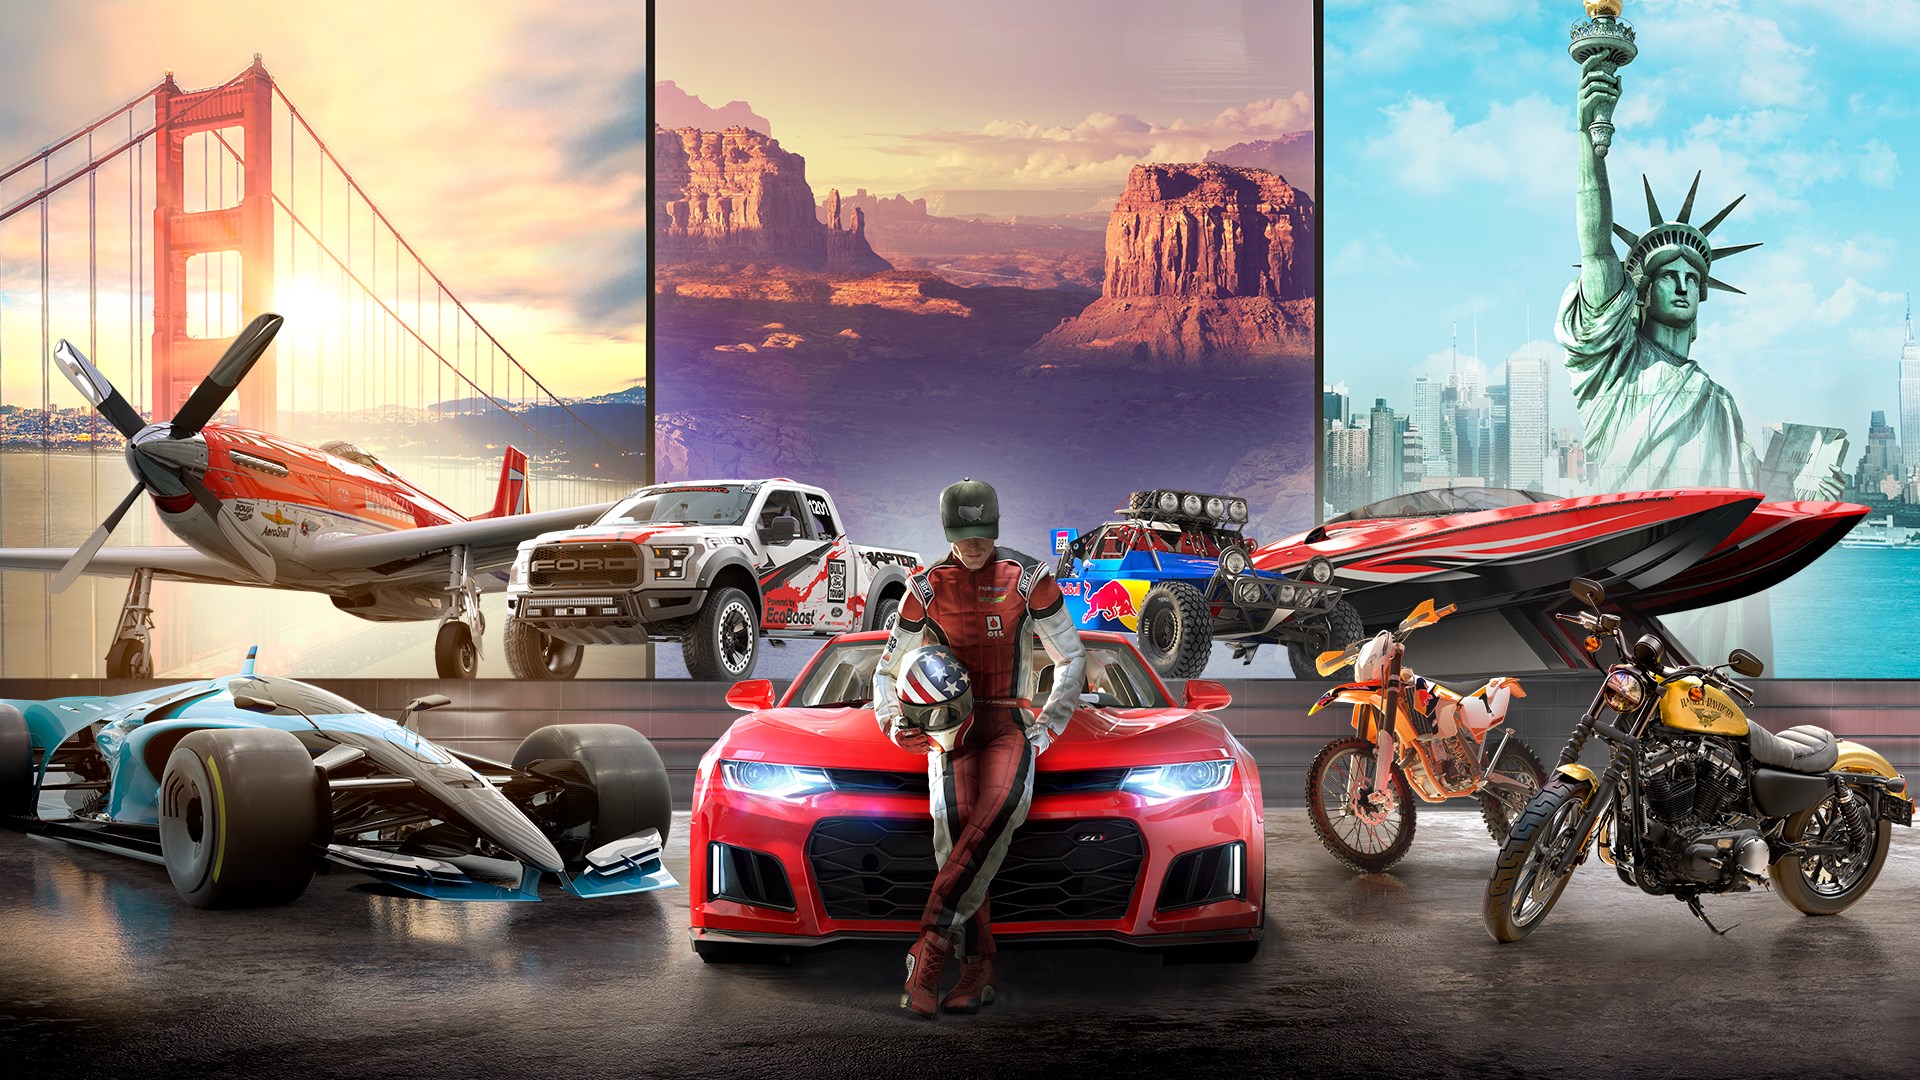 the crew 2 for xbox one